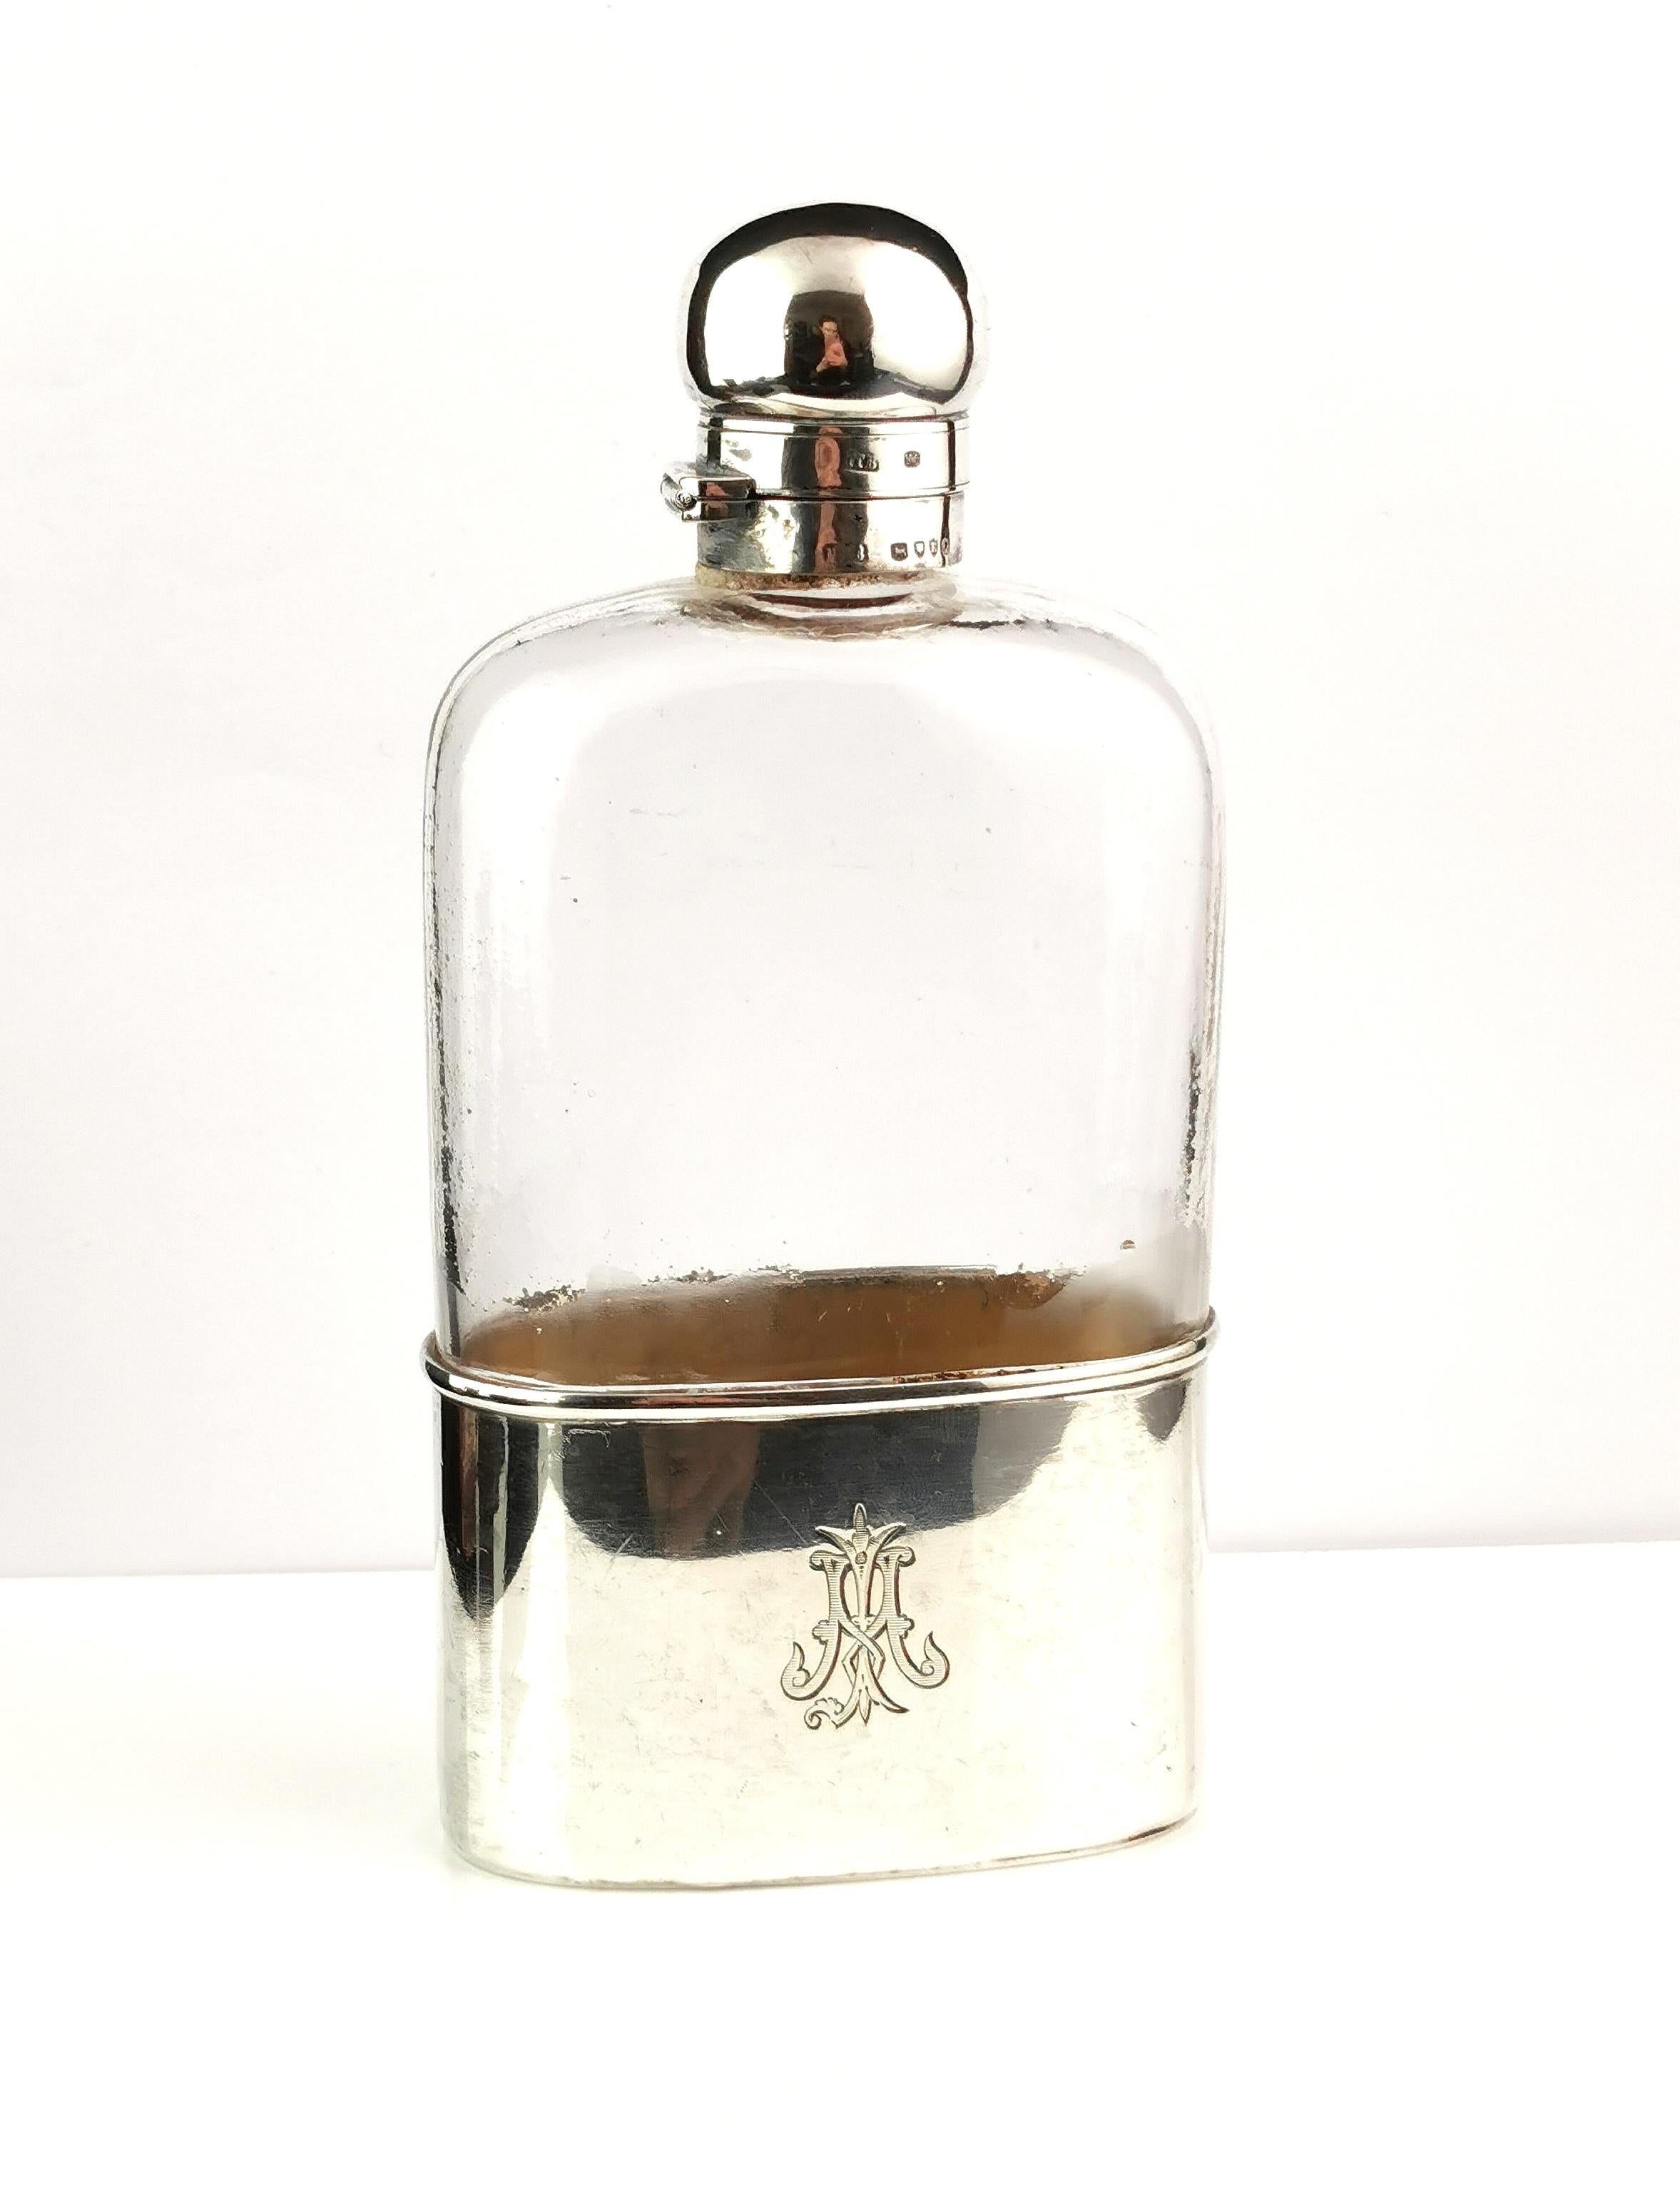 A handsome antique, sterling silver and glass hip flask.

Victorian era this substantial hip flask is made from glass with a sterling silver bayonet cap, Cork lined.

It has a sleek sterling silver beaker base, this can be removed to be used as a